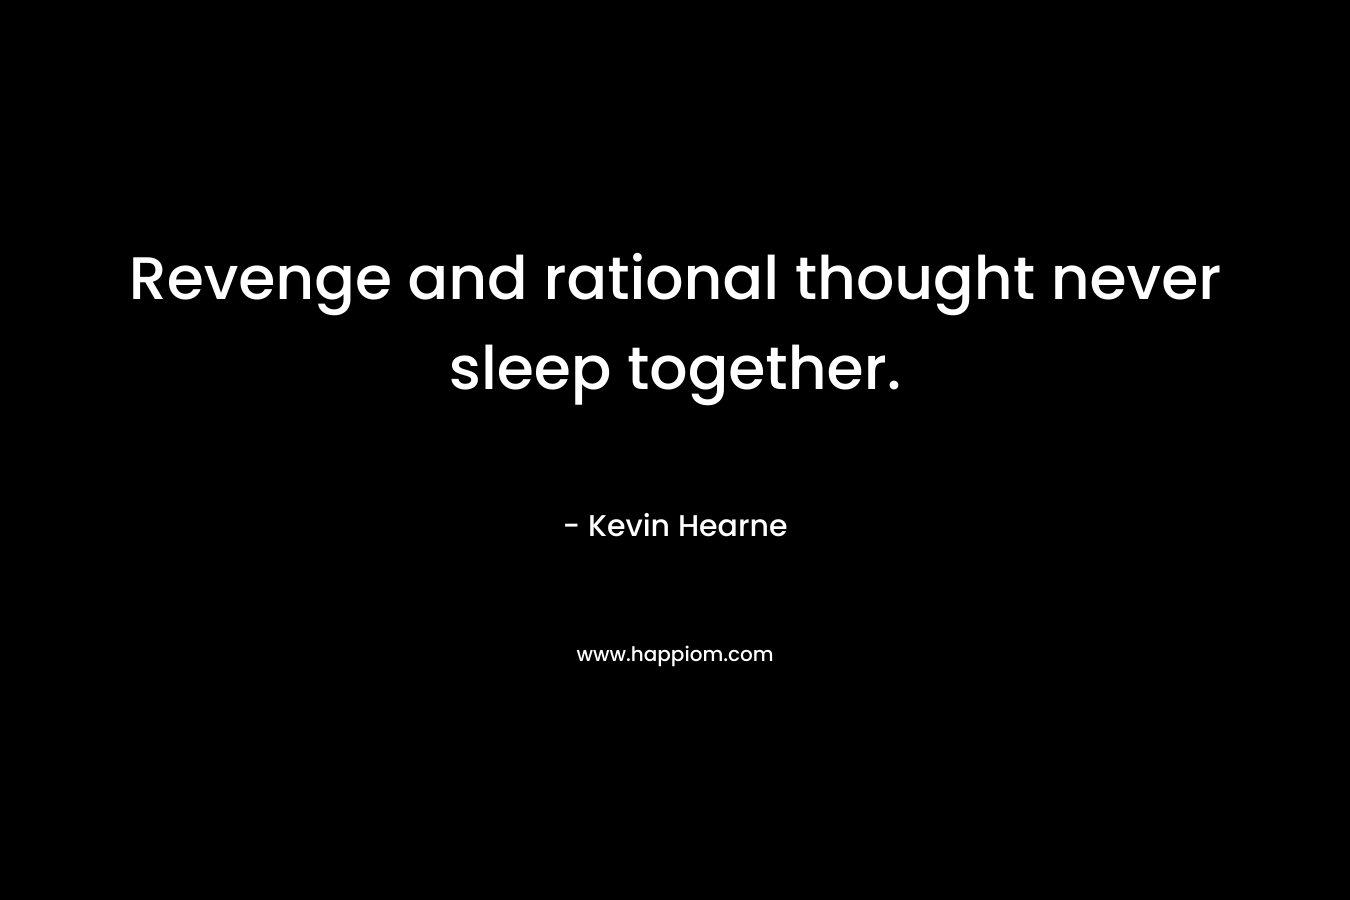 Revenge and rational thought never sleep together.